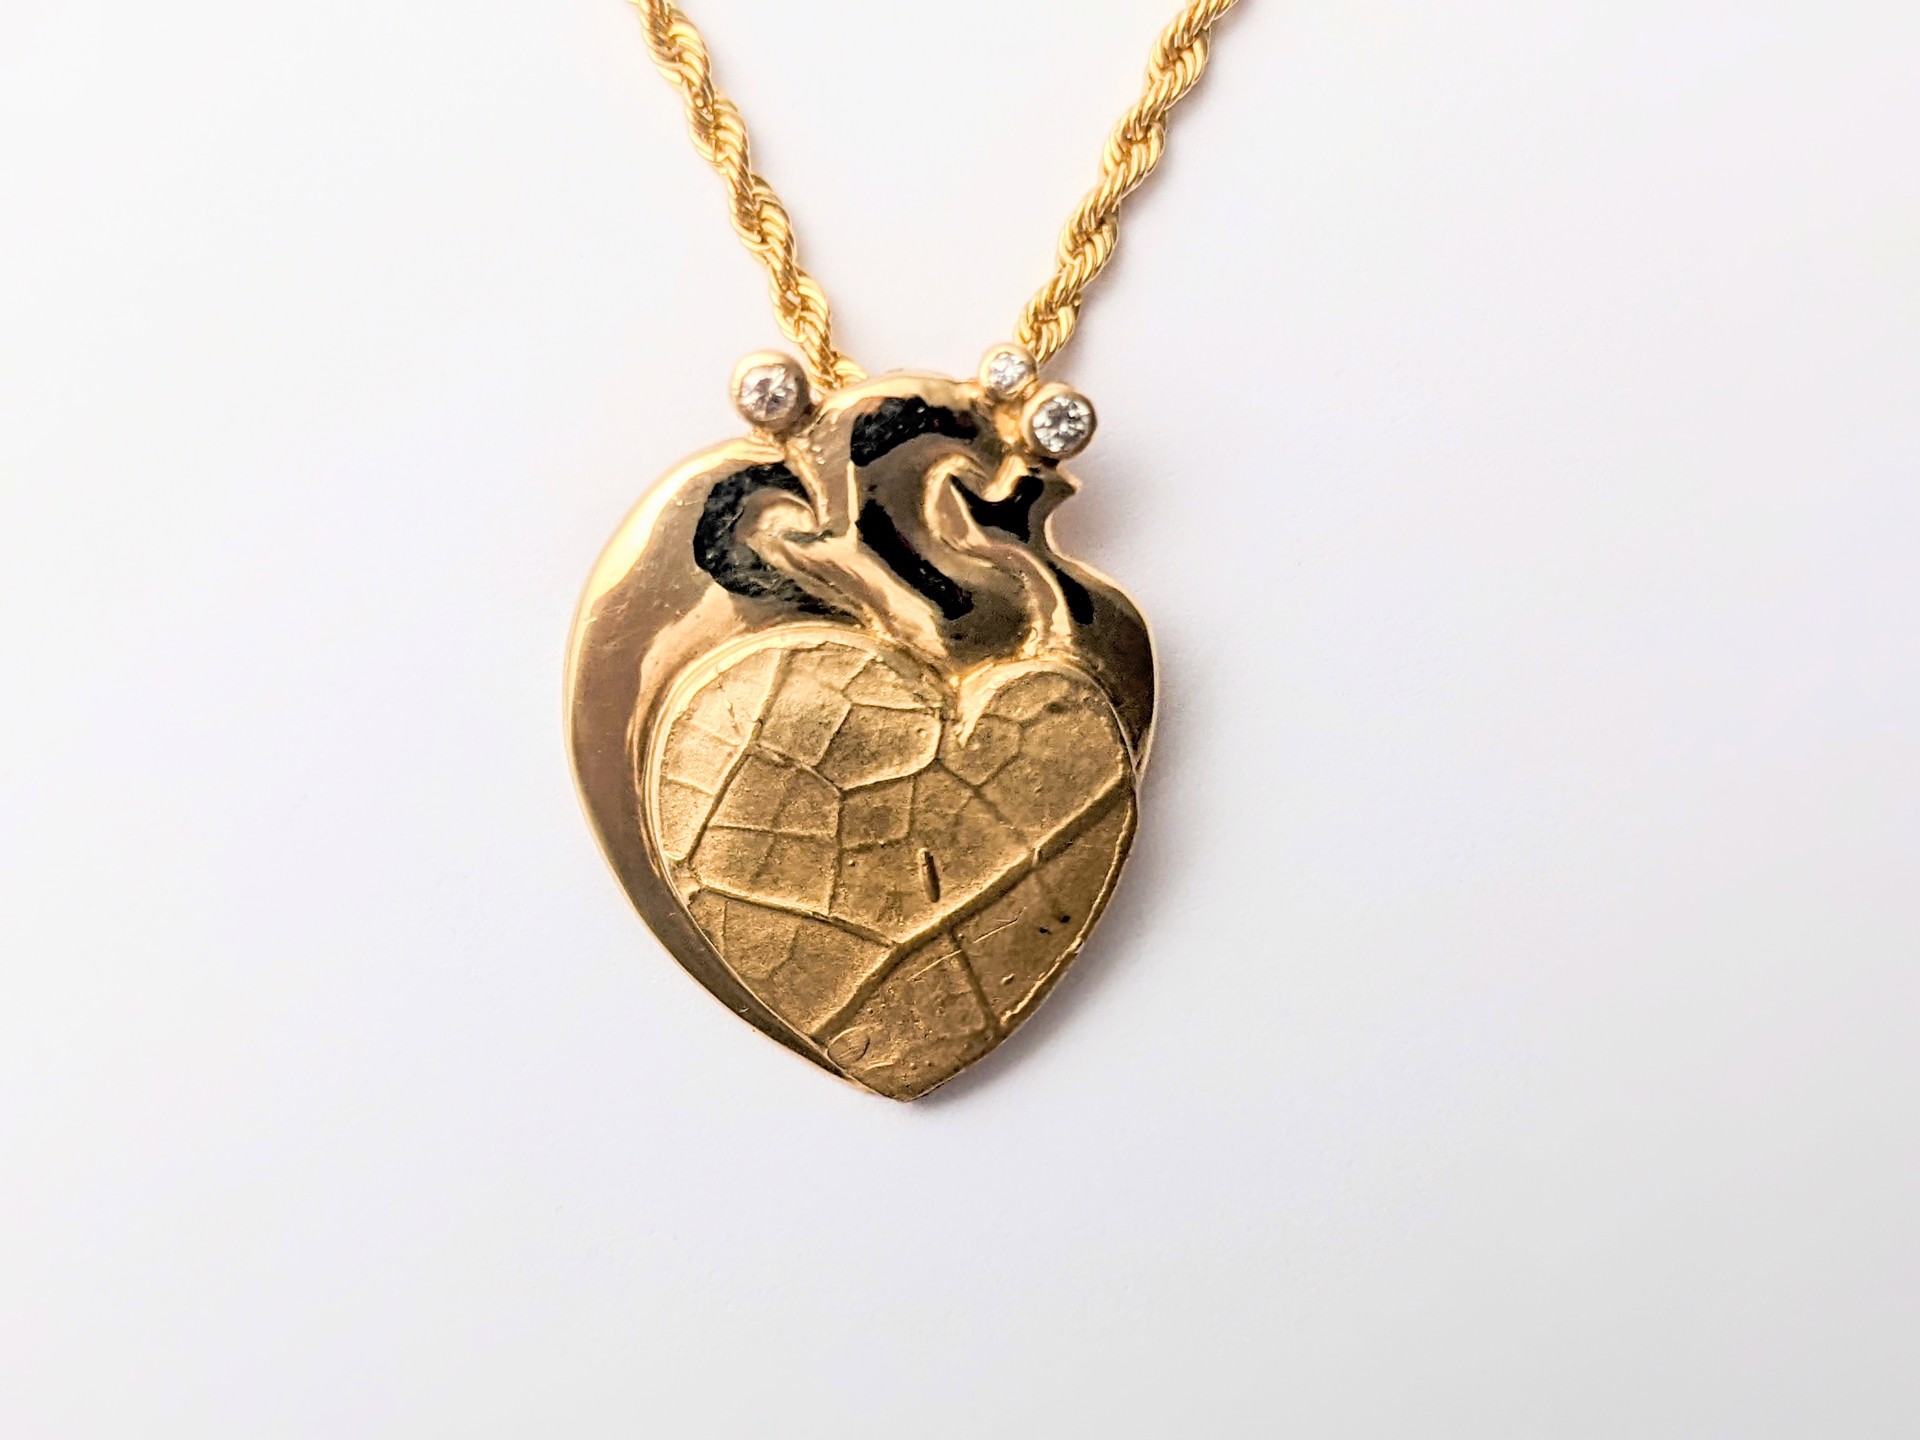 3 Waves & Heart Pendant by Sharon Amber